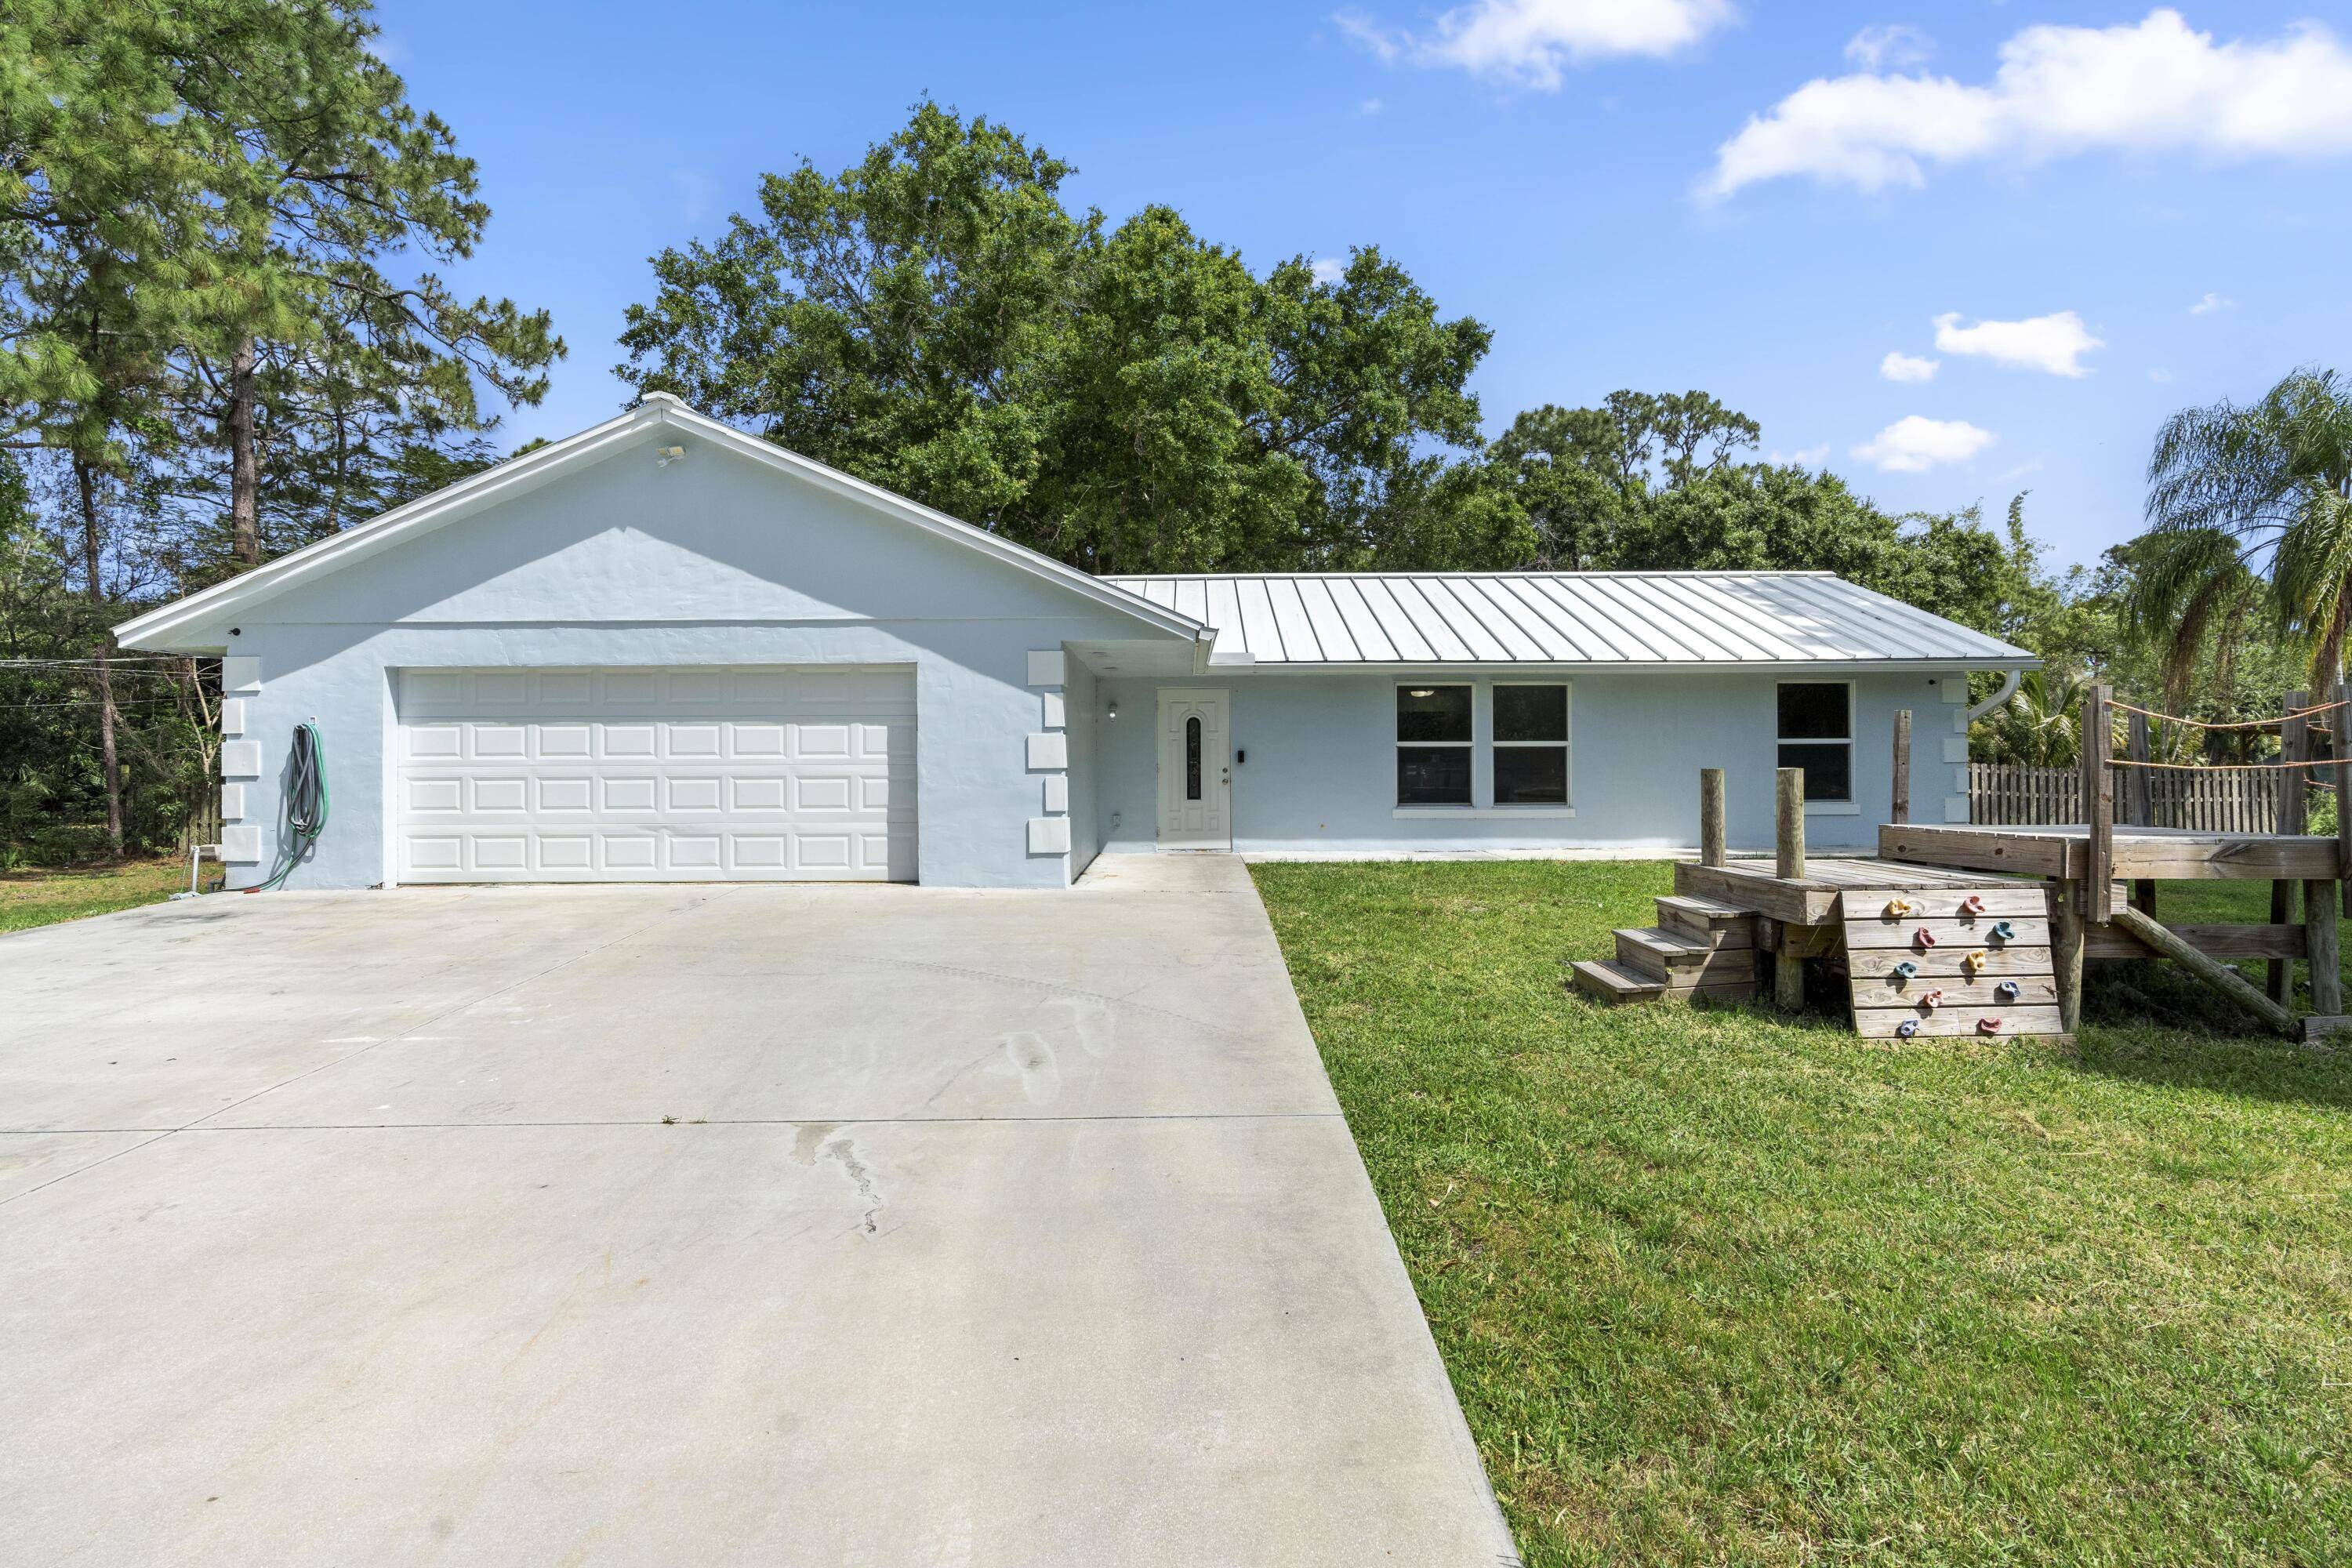 This 4 bedroom, den, 2 bathroom Jupiter Farms home offers the perfect canvas for creating your dream home in a serene and peaceful setting on 1.